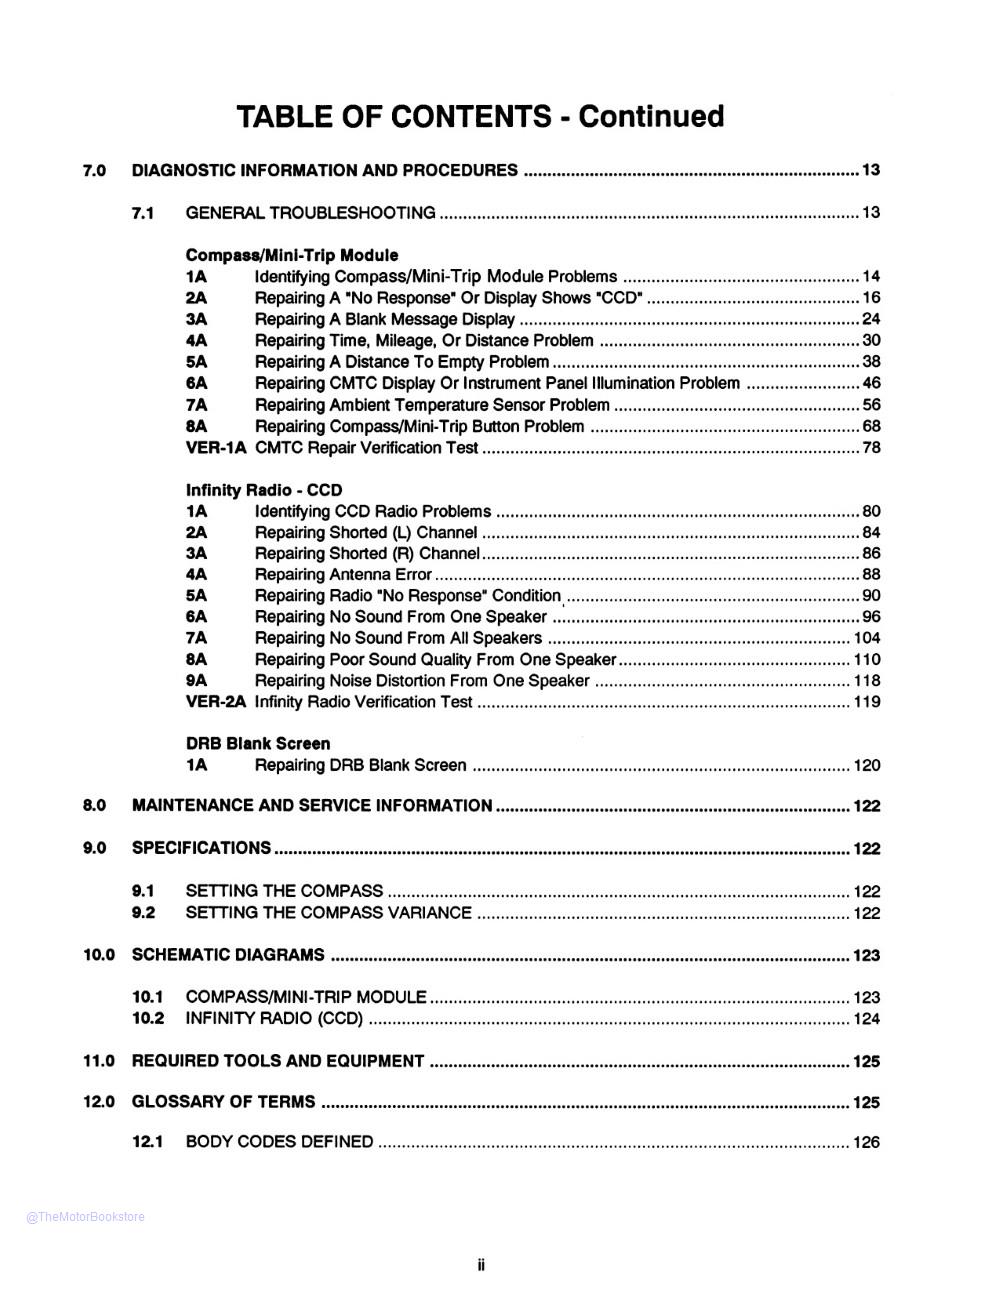 1993-95 Jeep Grand Cherokee Diagnostic Procedures Manual  - Table of Contents 2